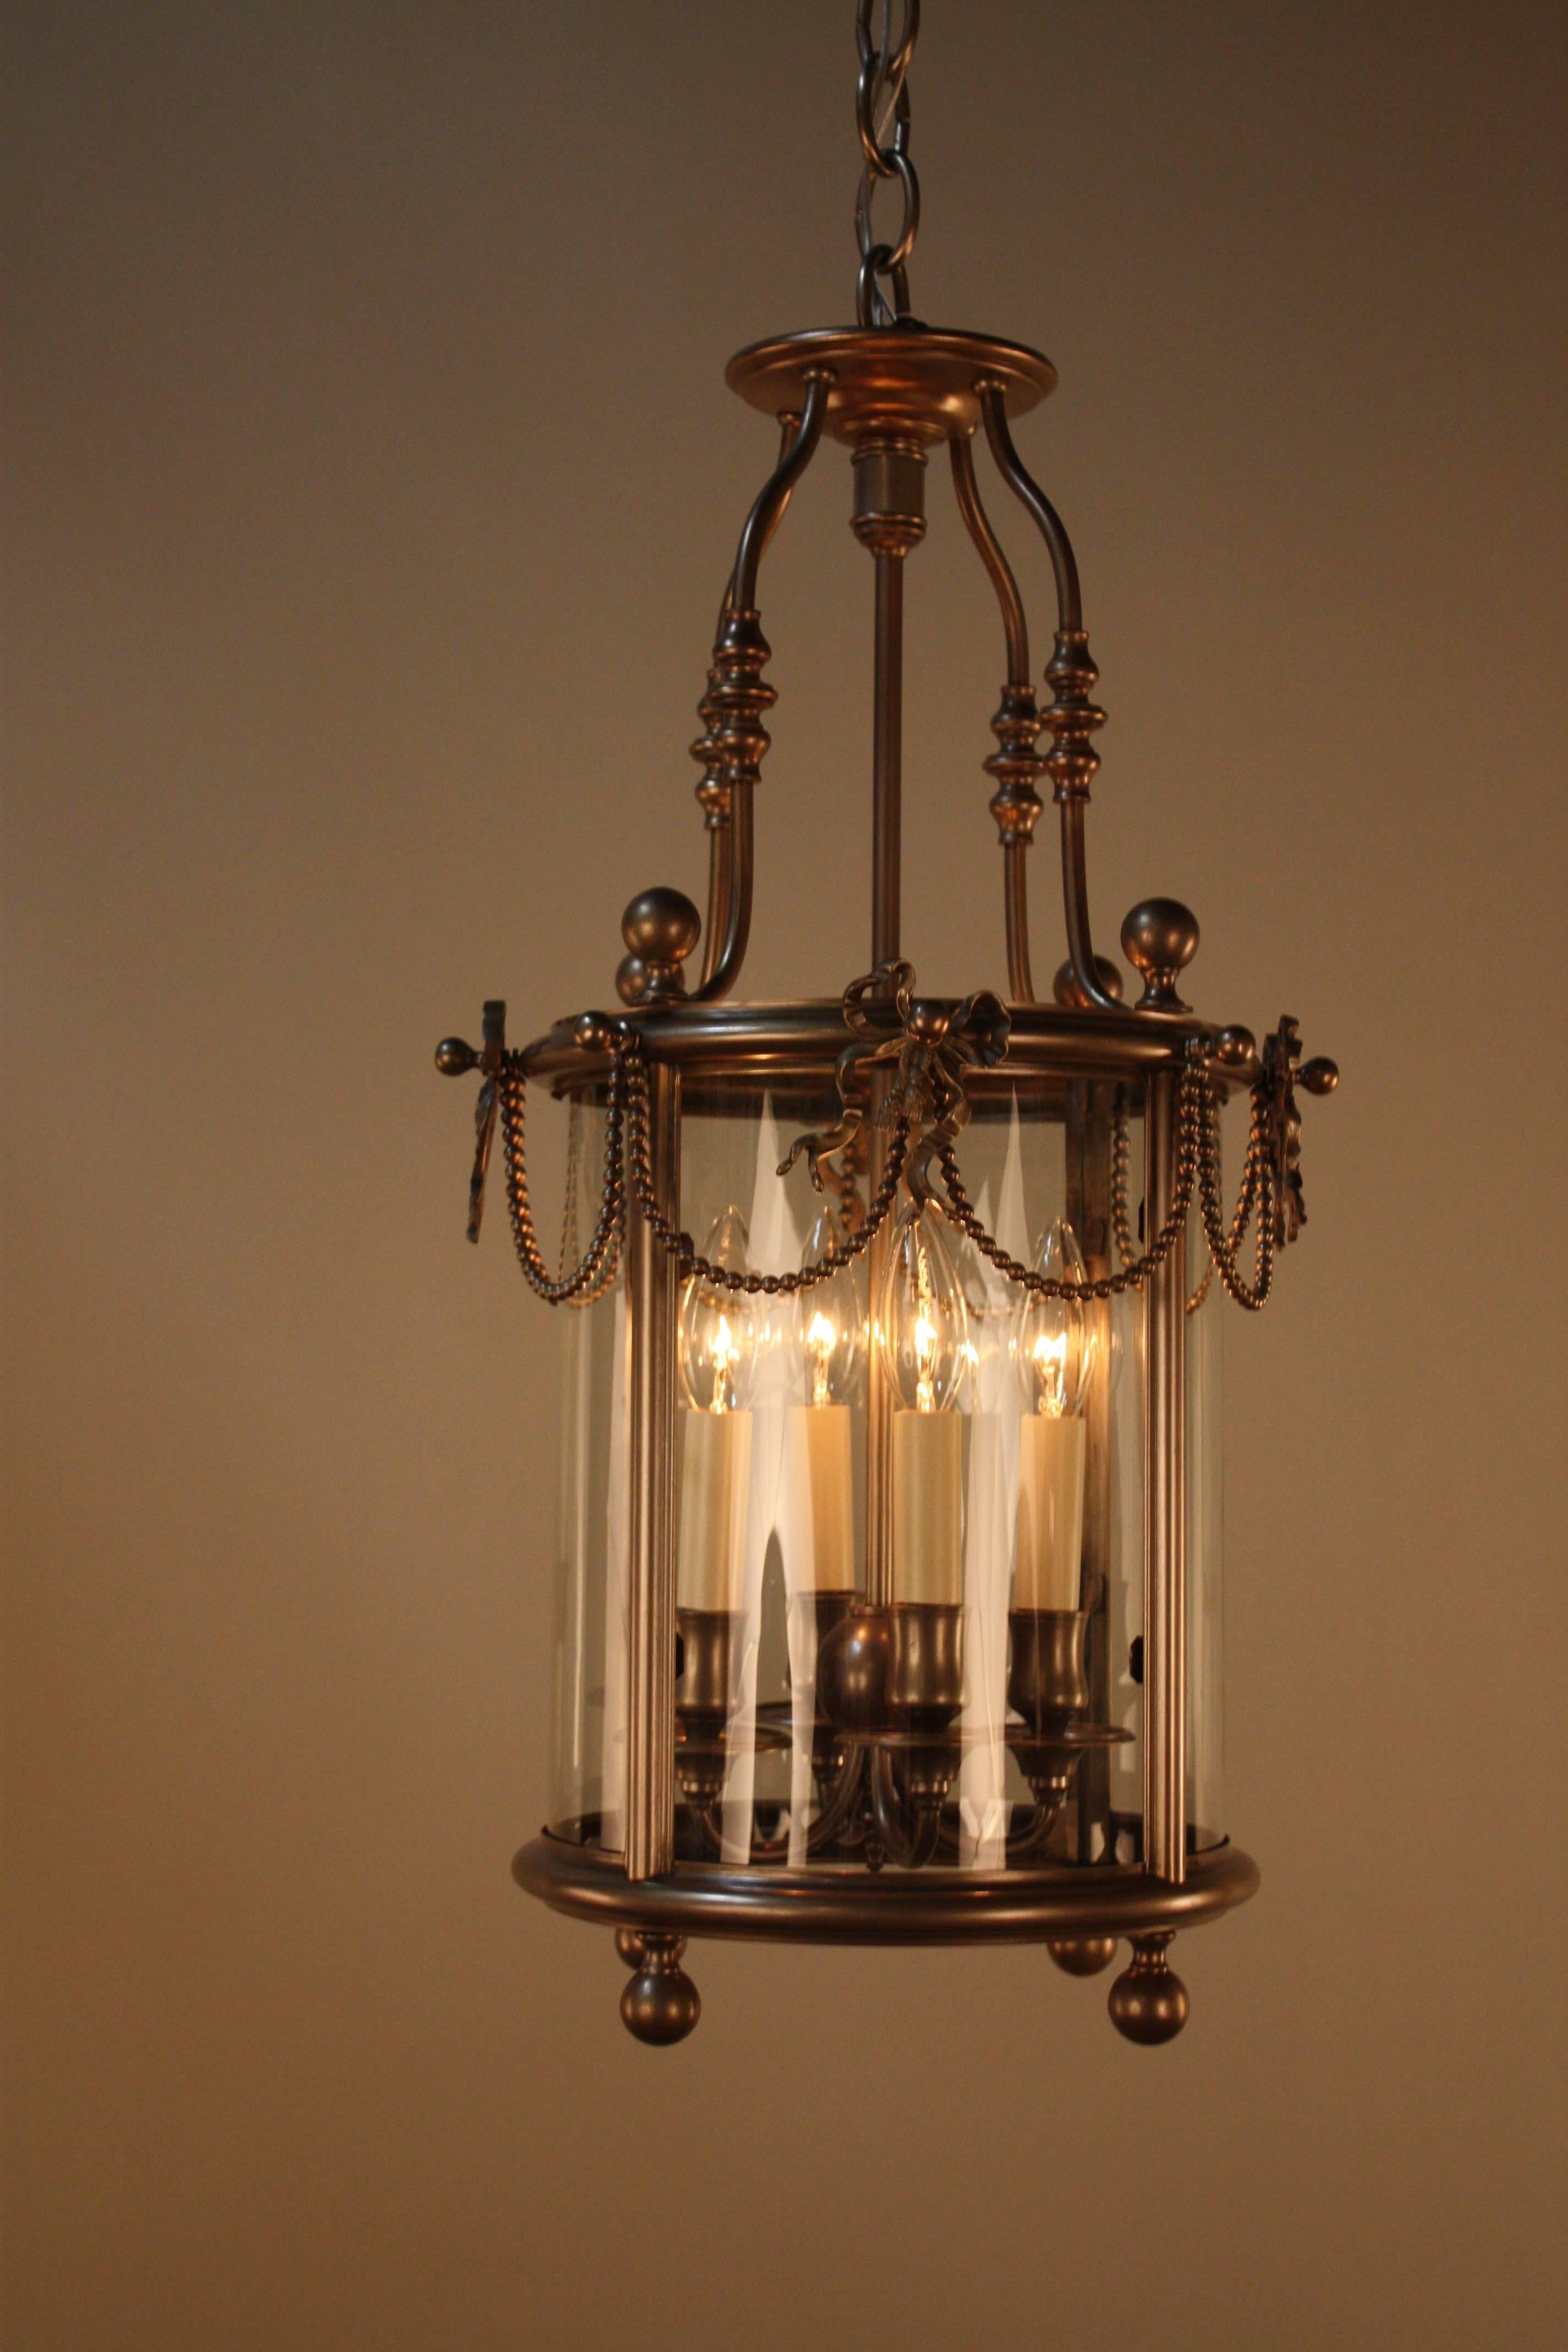 French early 20th century four lights lantern with beautiful finish of silver or bronze.
Minimum height fully installed with one link of chain and canopy is 27.5